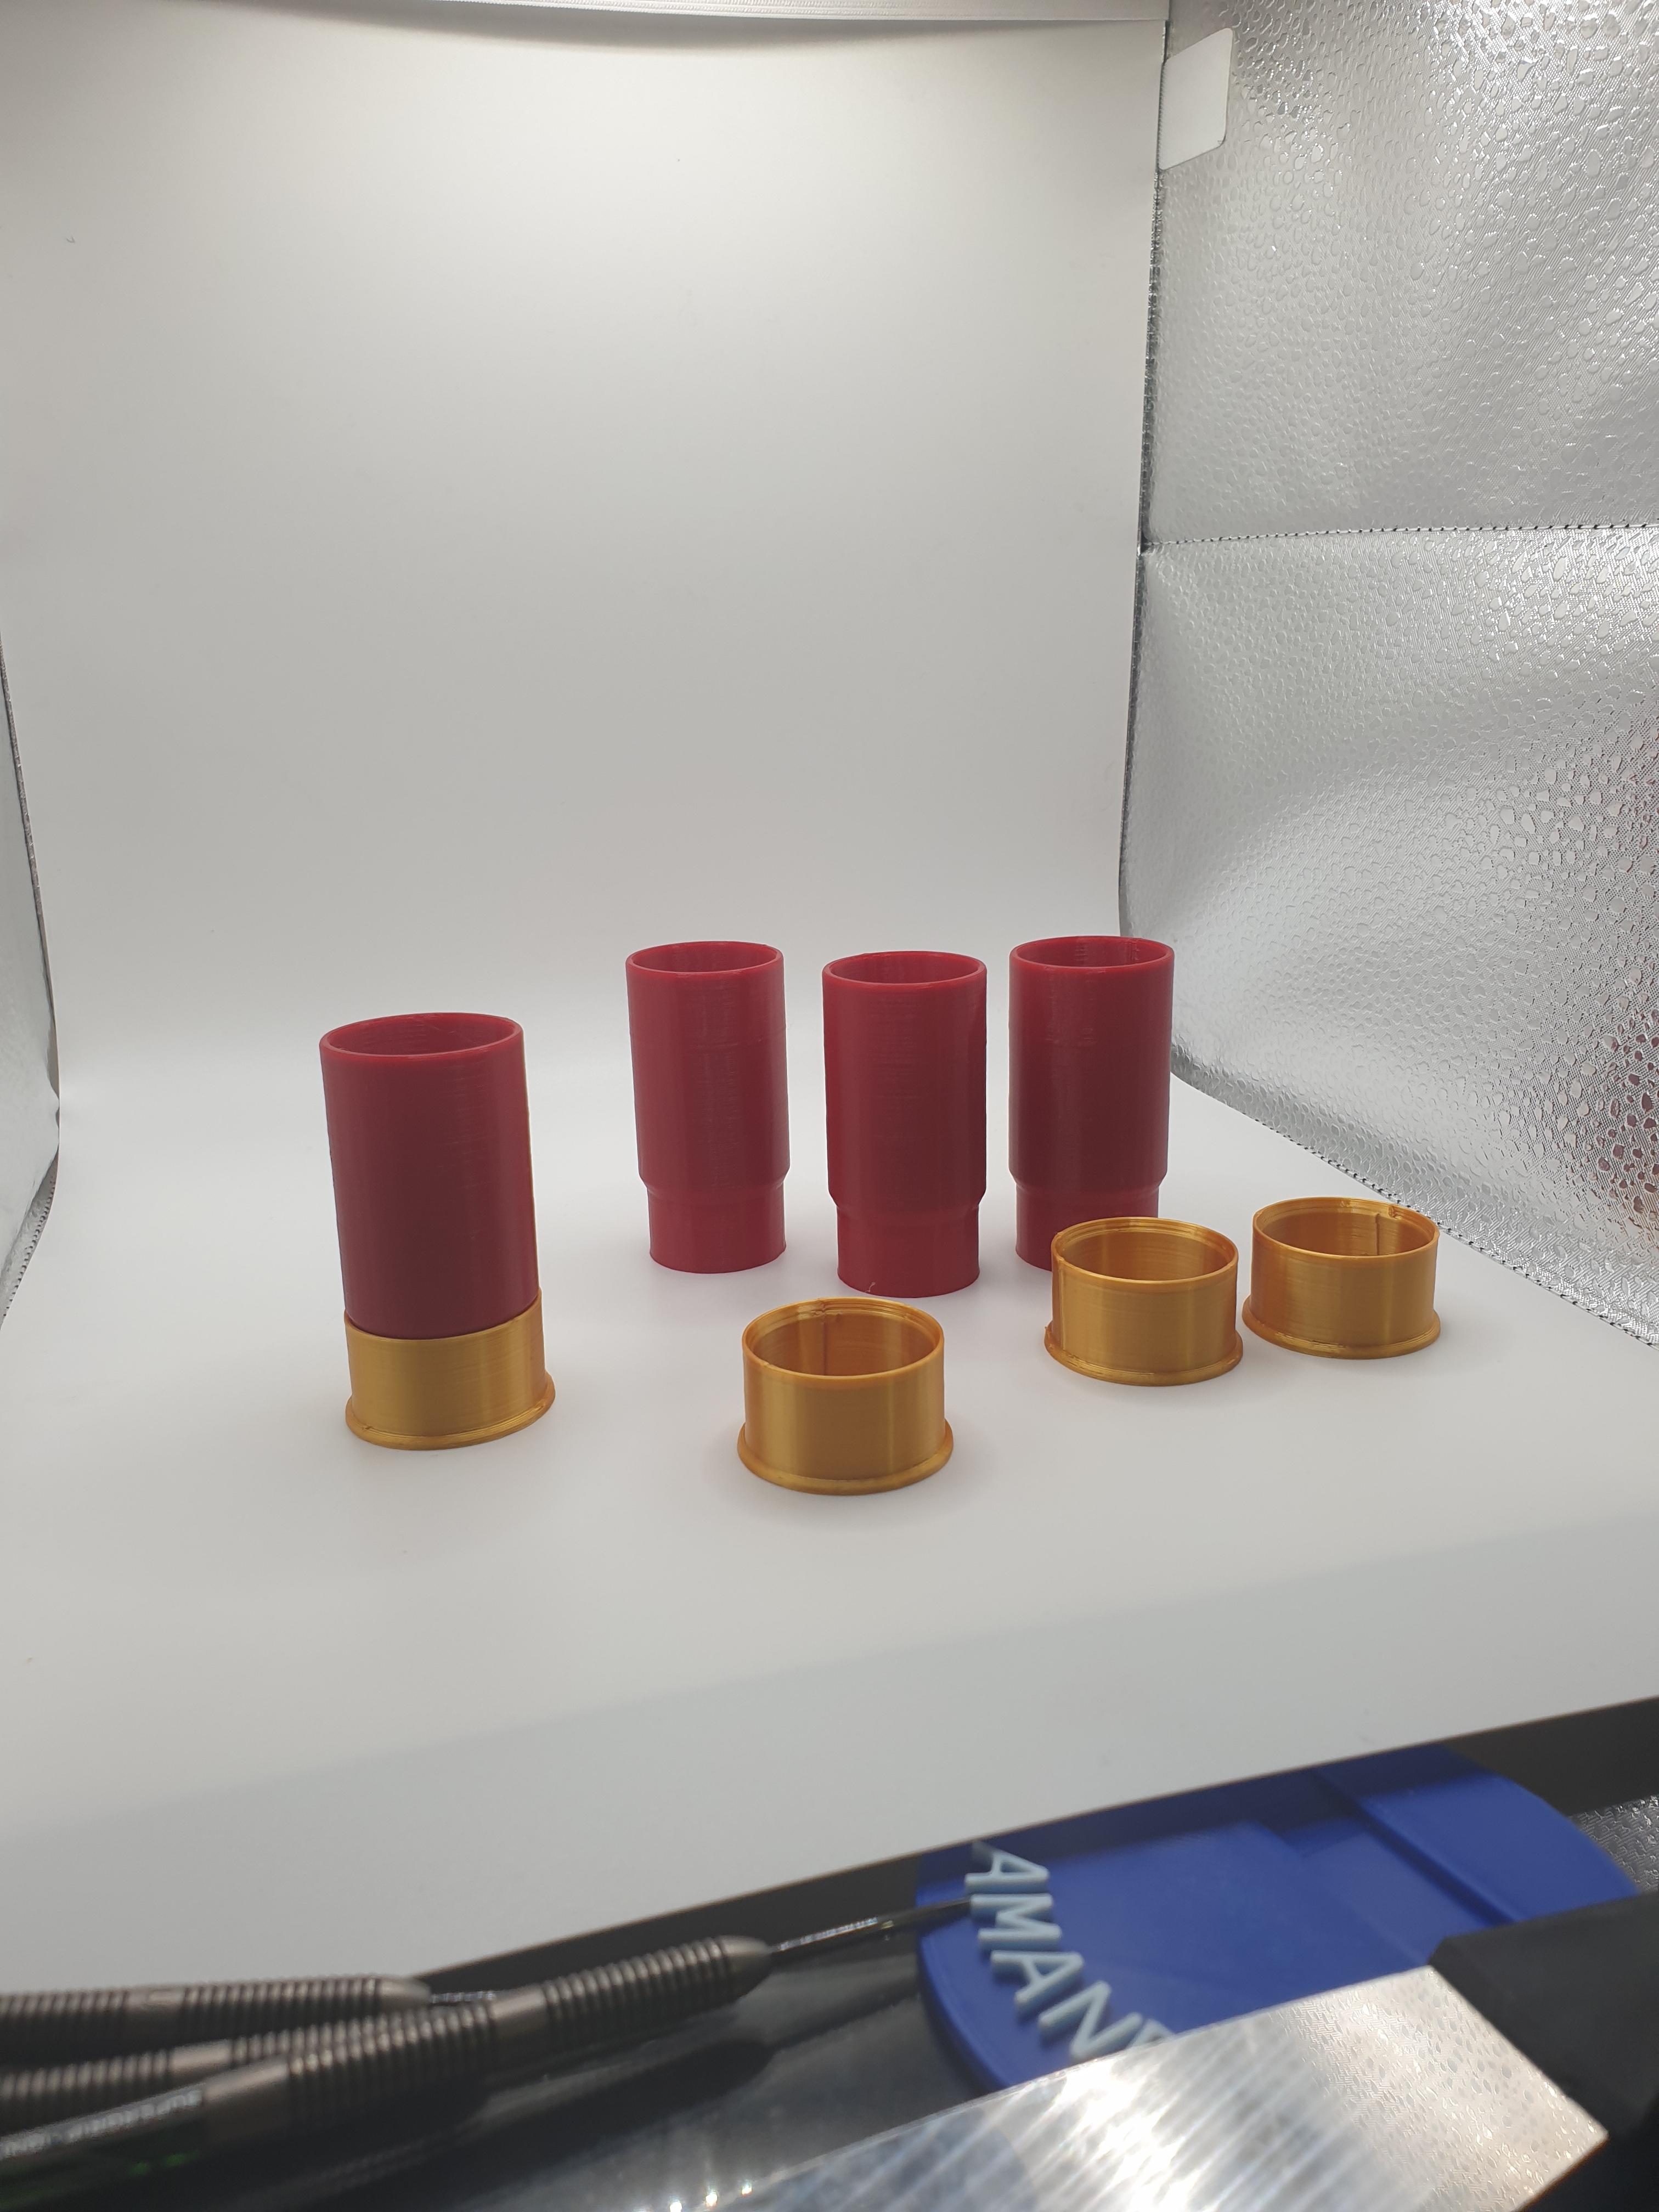 12 BORE SHOT GLASSES AND KNUCKLE DUSTER STAND 3d model